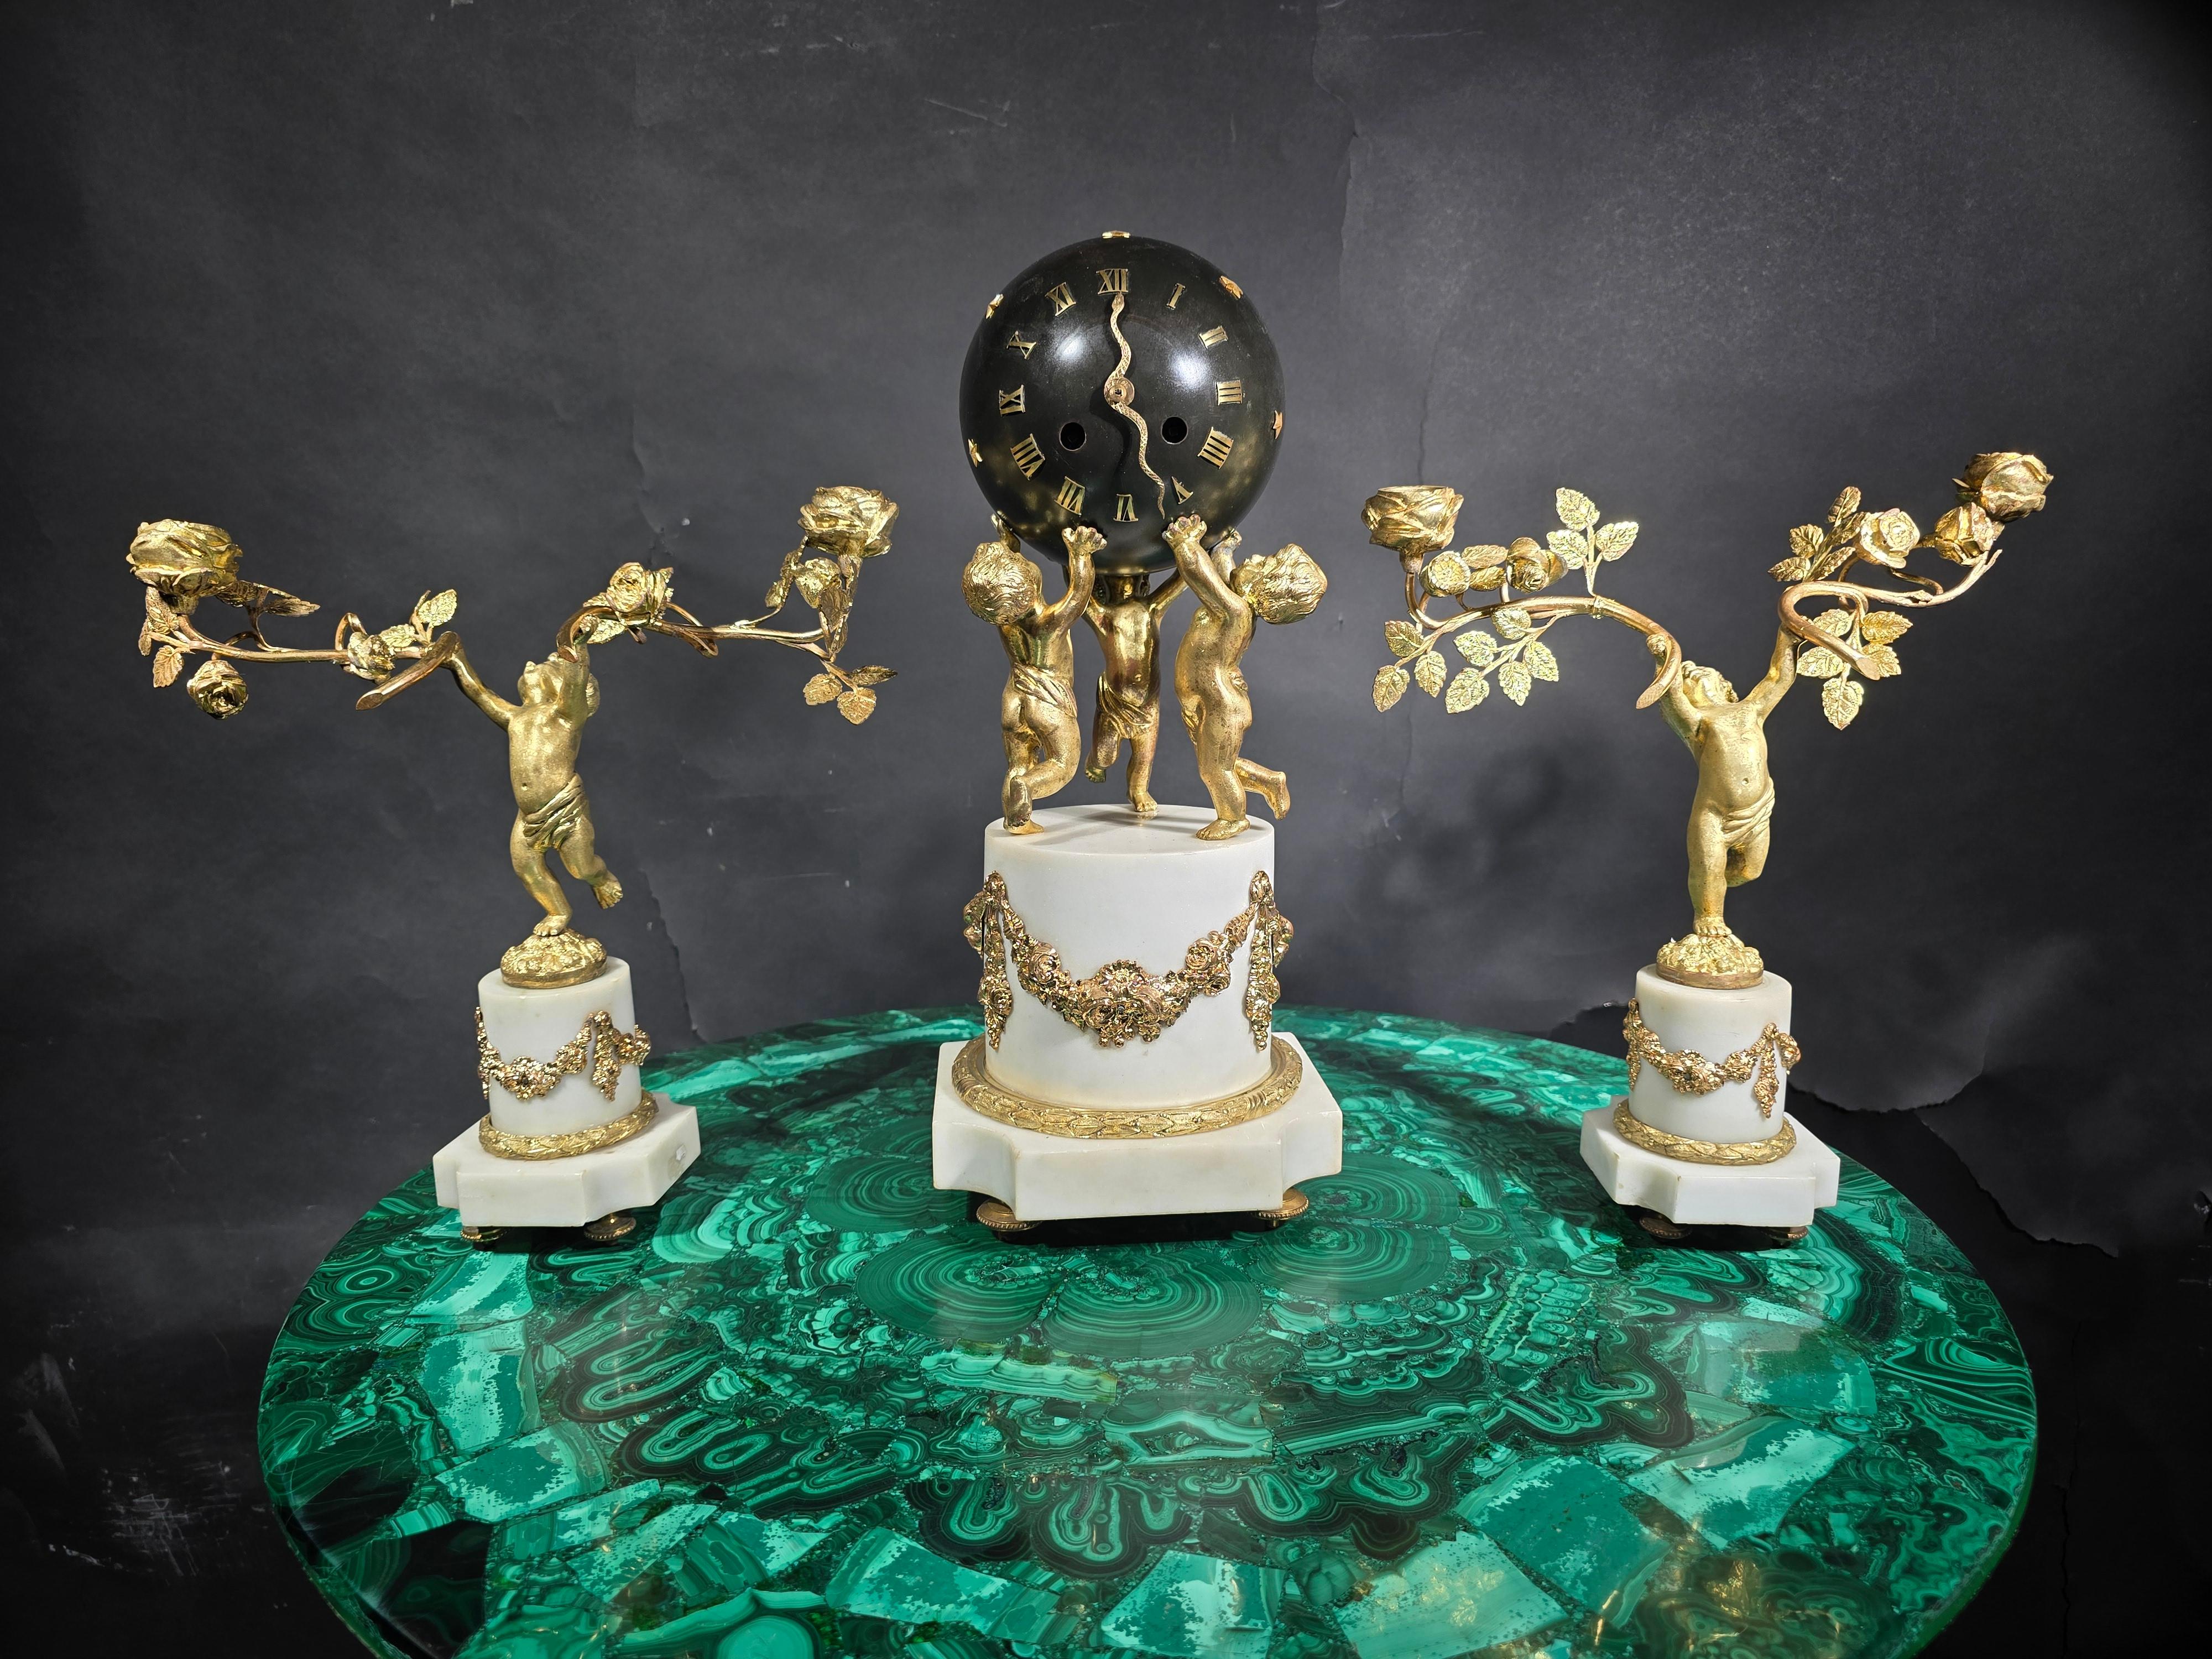 Product Description:

Materials: Gilt bronze and Carrara white marble
Style: 19th Century French
Features: Representation of cherubs holding the terrestrial globe
Clock Dimensions: 40 x 17 x 17 cm
Candelabra Dimensions: 35 x 30 x 15 cm
Features and